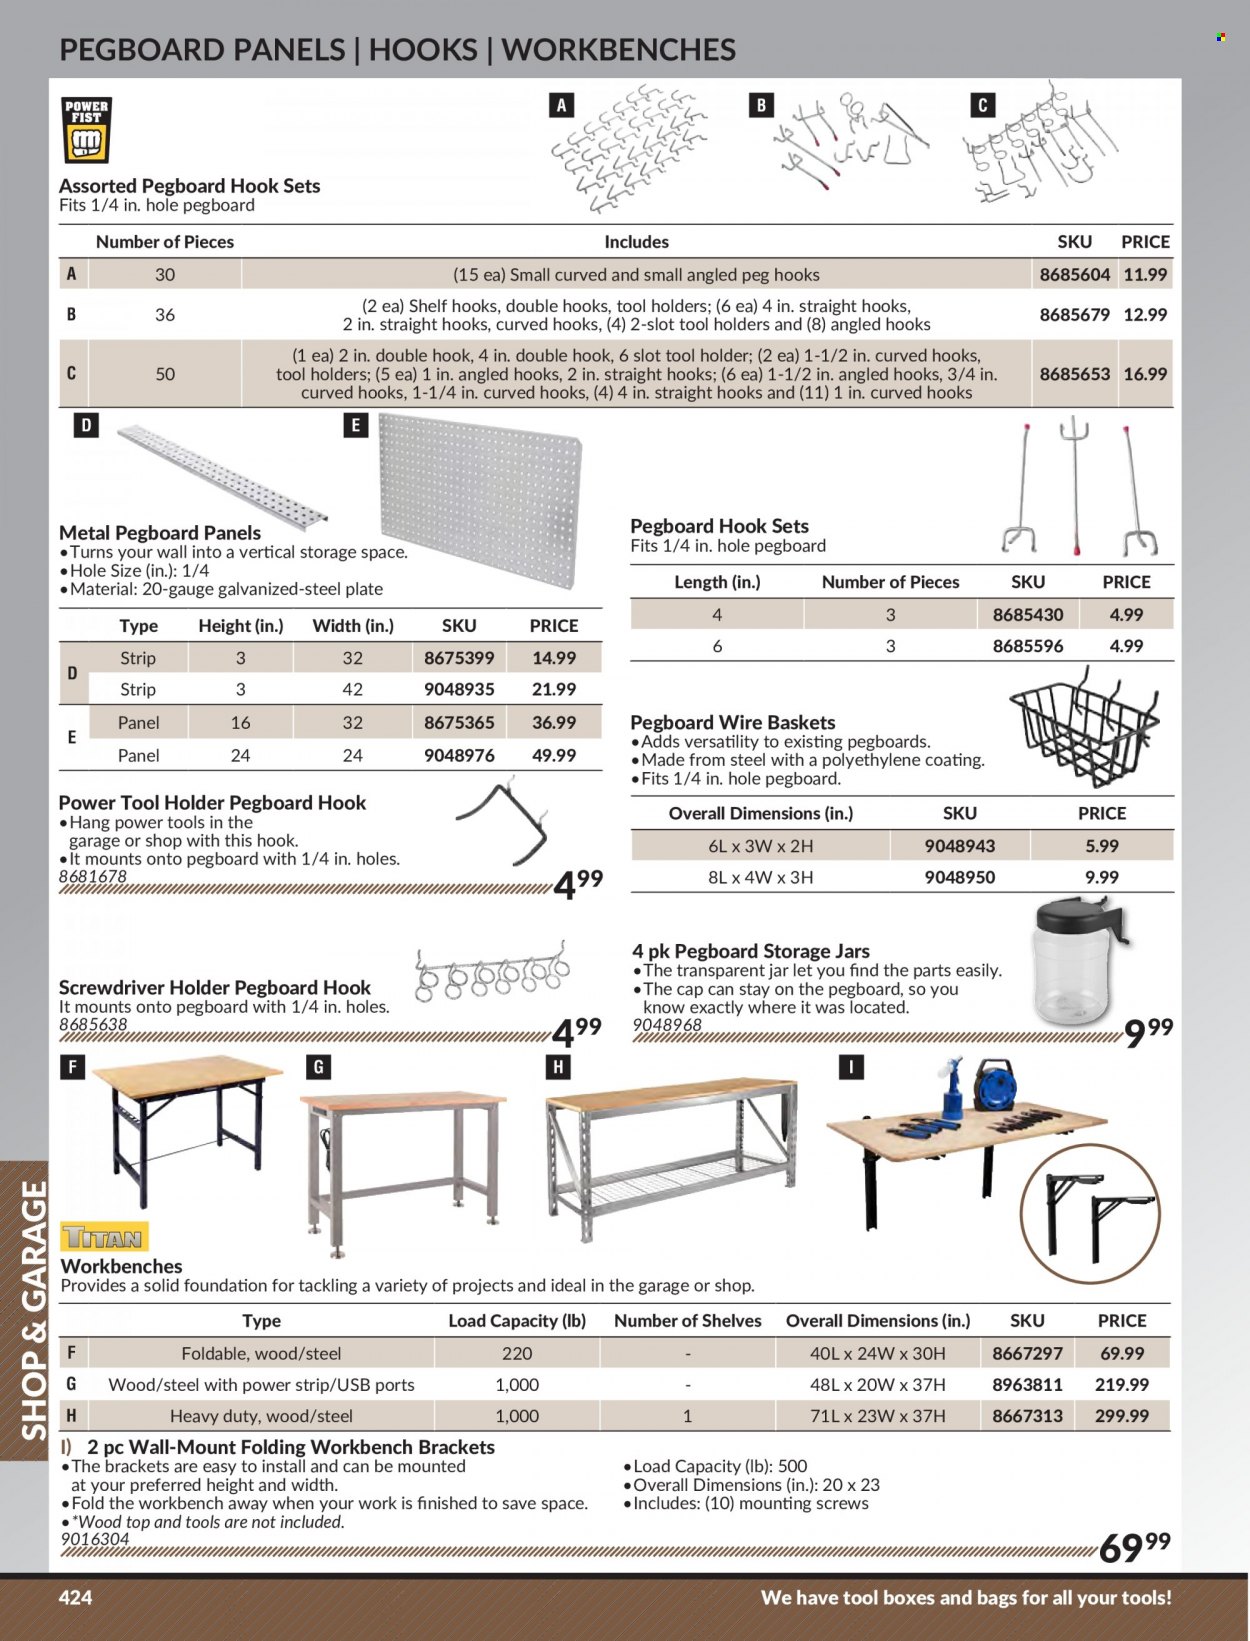 Princess Auto Flyer - Sales products - pegboard, power tools, tool box, double hook, work bench, tool holder, basket. Page 432.